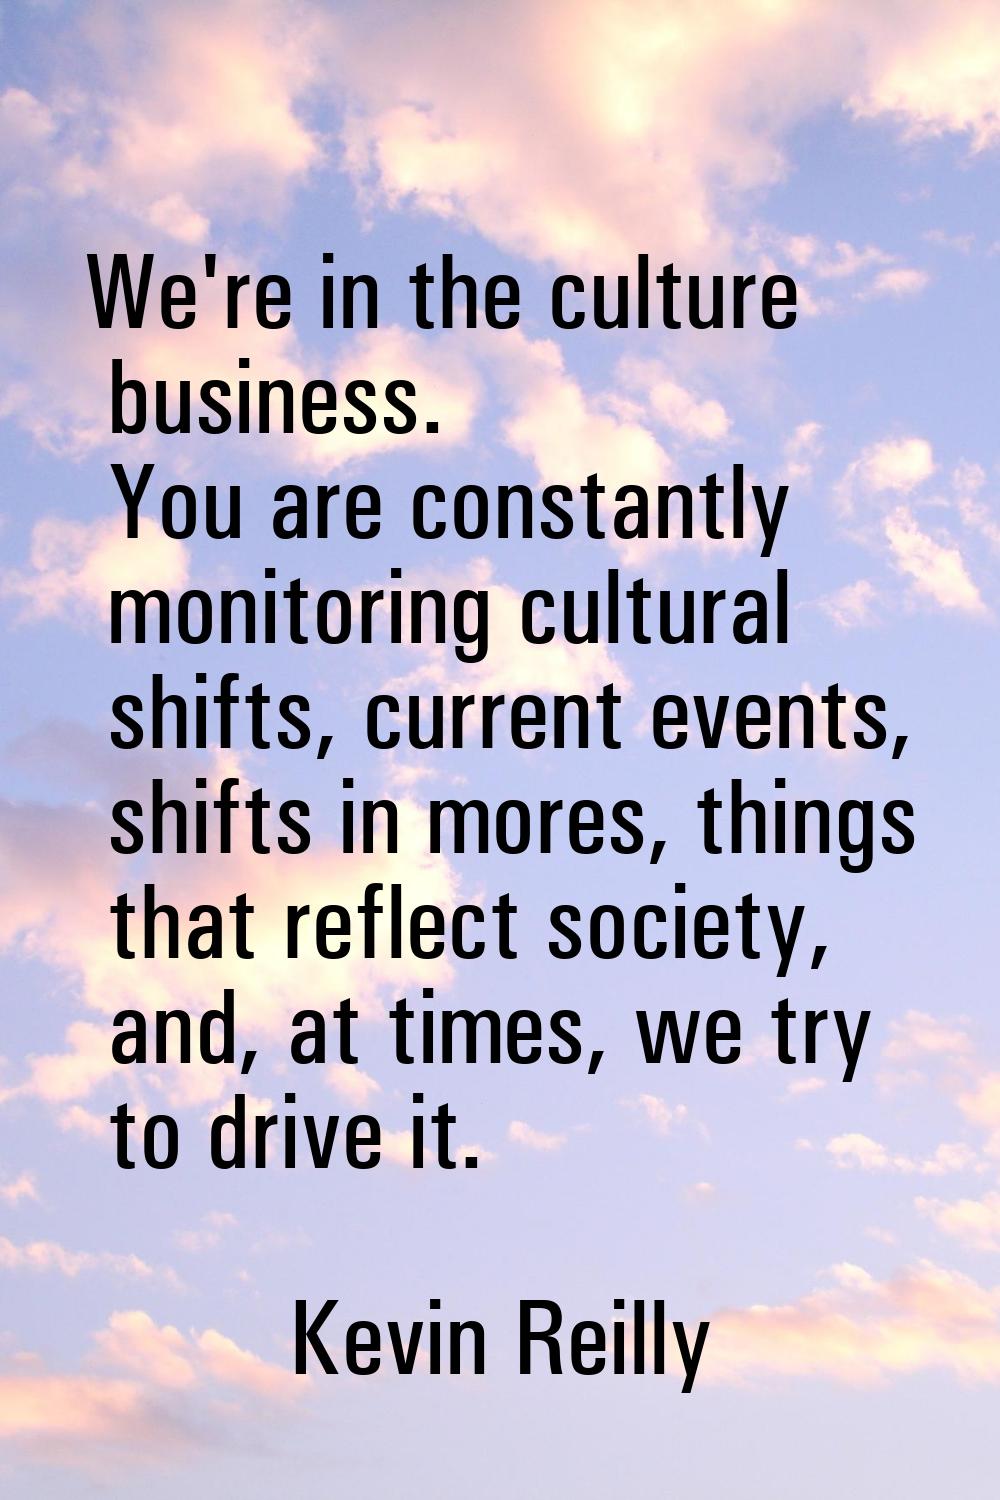 We're in the culture business. You are constantly monitoring cultural shifts, current events, shift